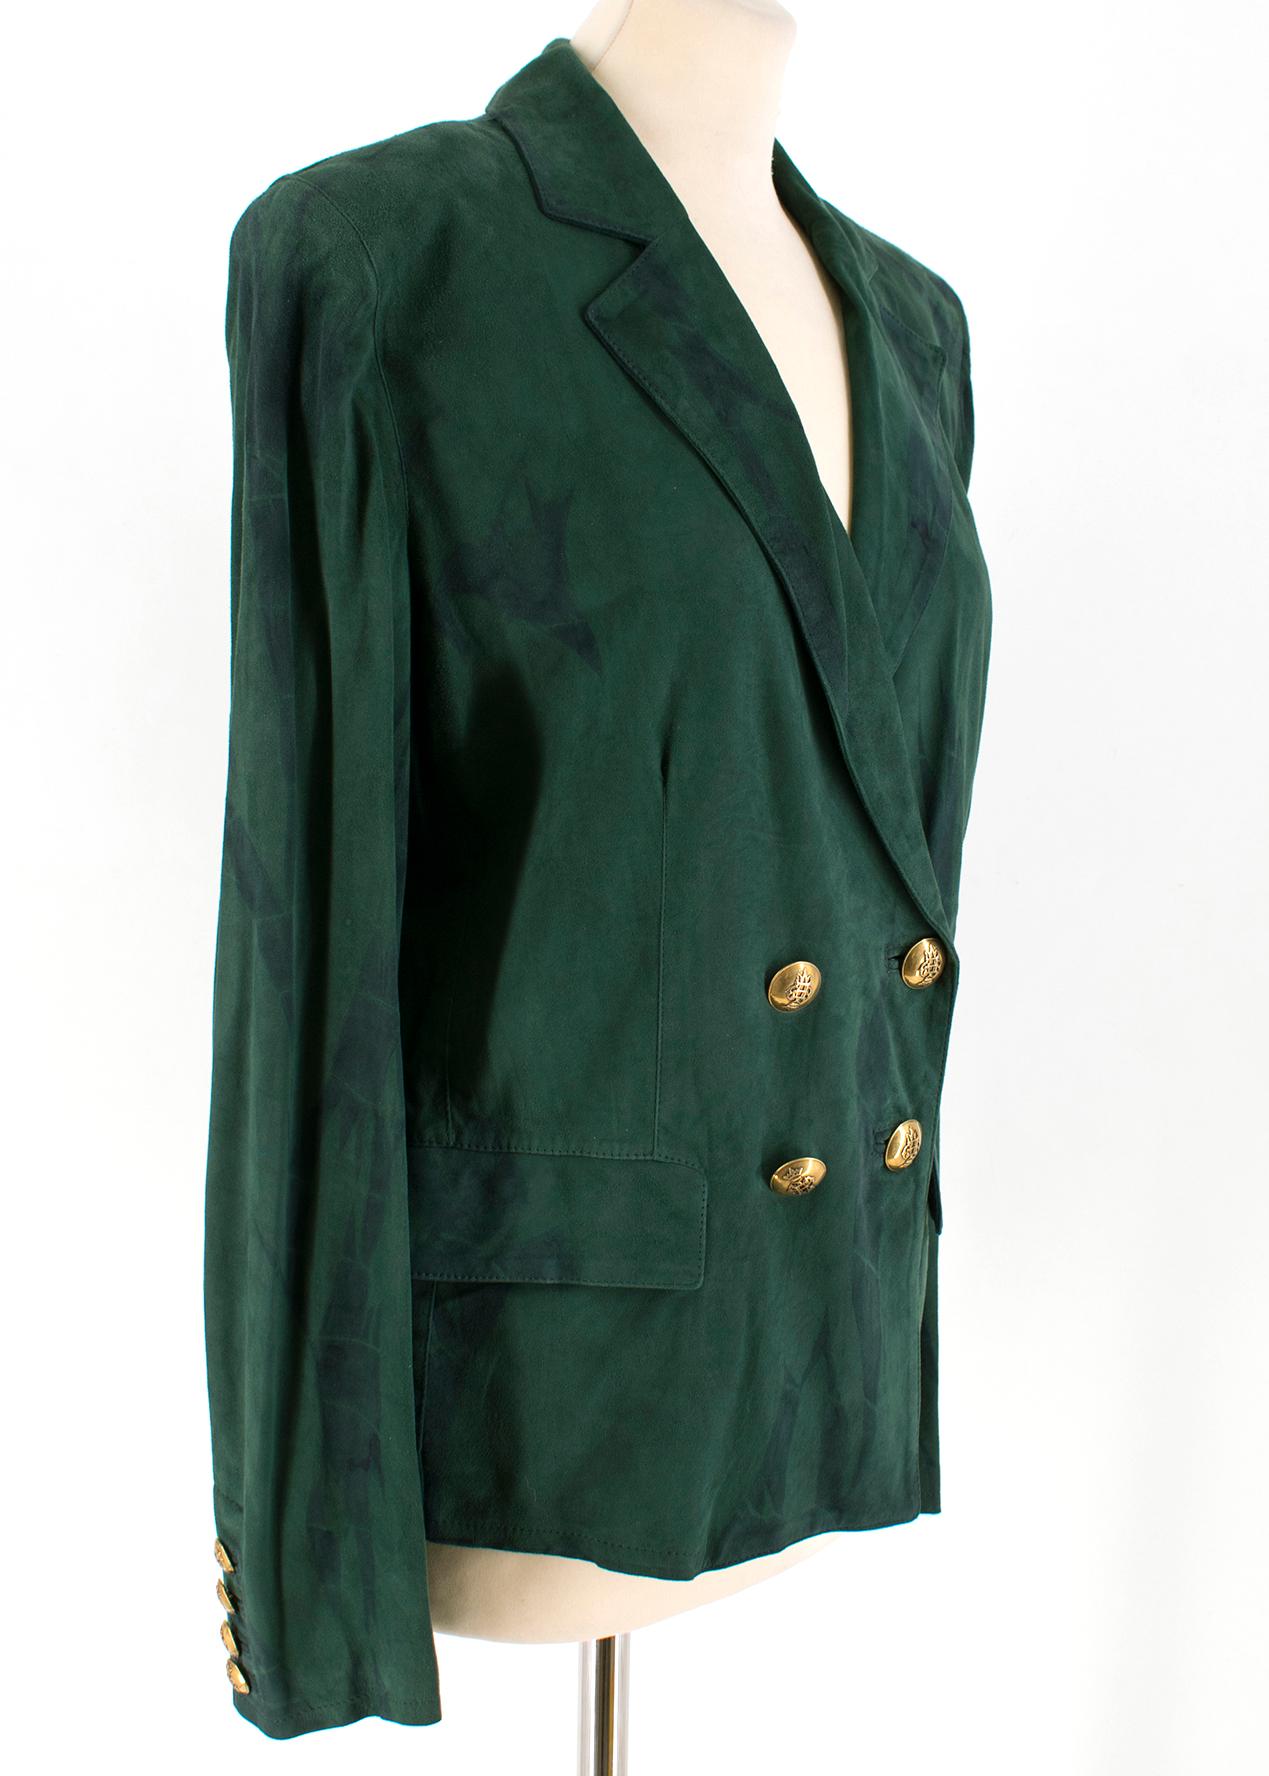 Emilio Pucci Green Double-breasted Suede Blazer Jacket

- Green suede blazer jacket
- Lightweight
- Padded shoulders
- Notch lapels
- Double-breasted two buttons fastening
- Buttoned cuffs
- Front flap pockets

Please note, these items are pre-owned